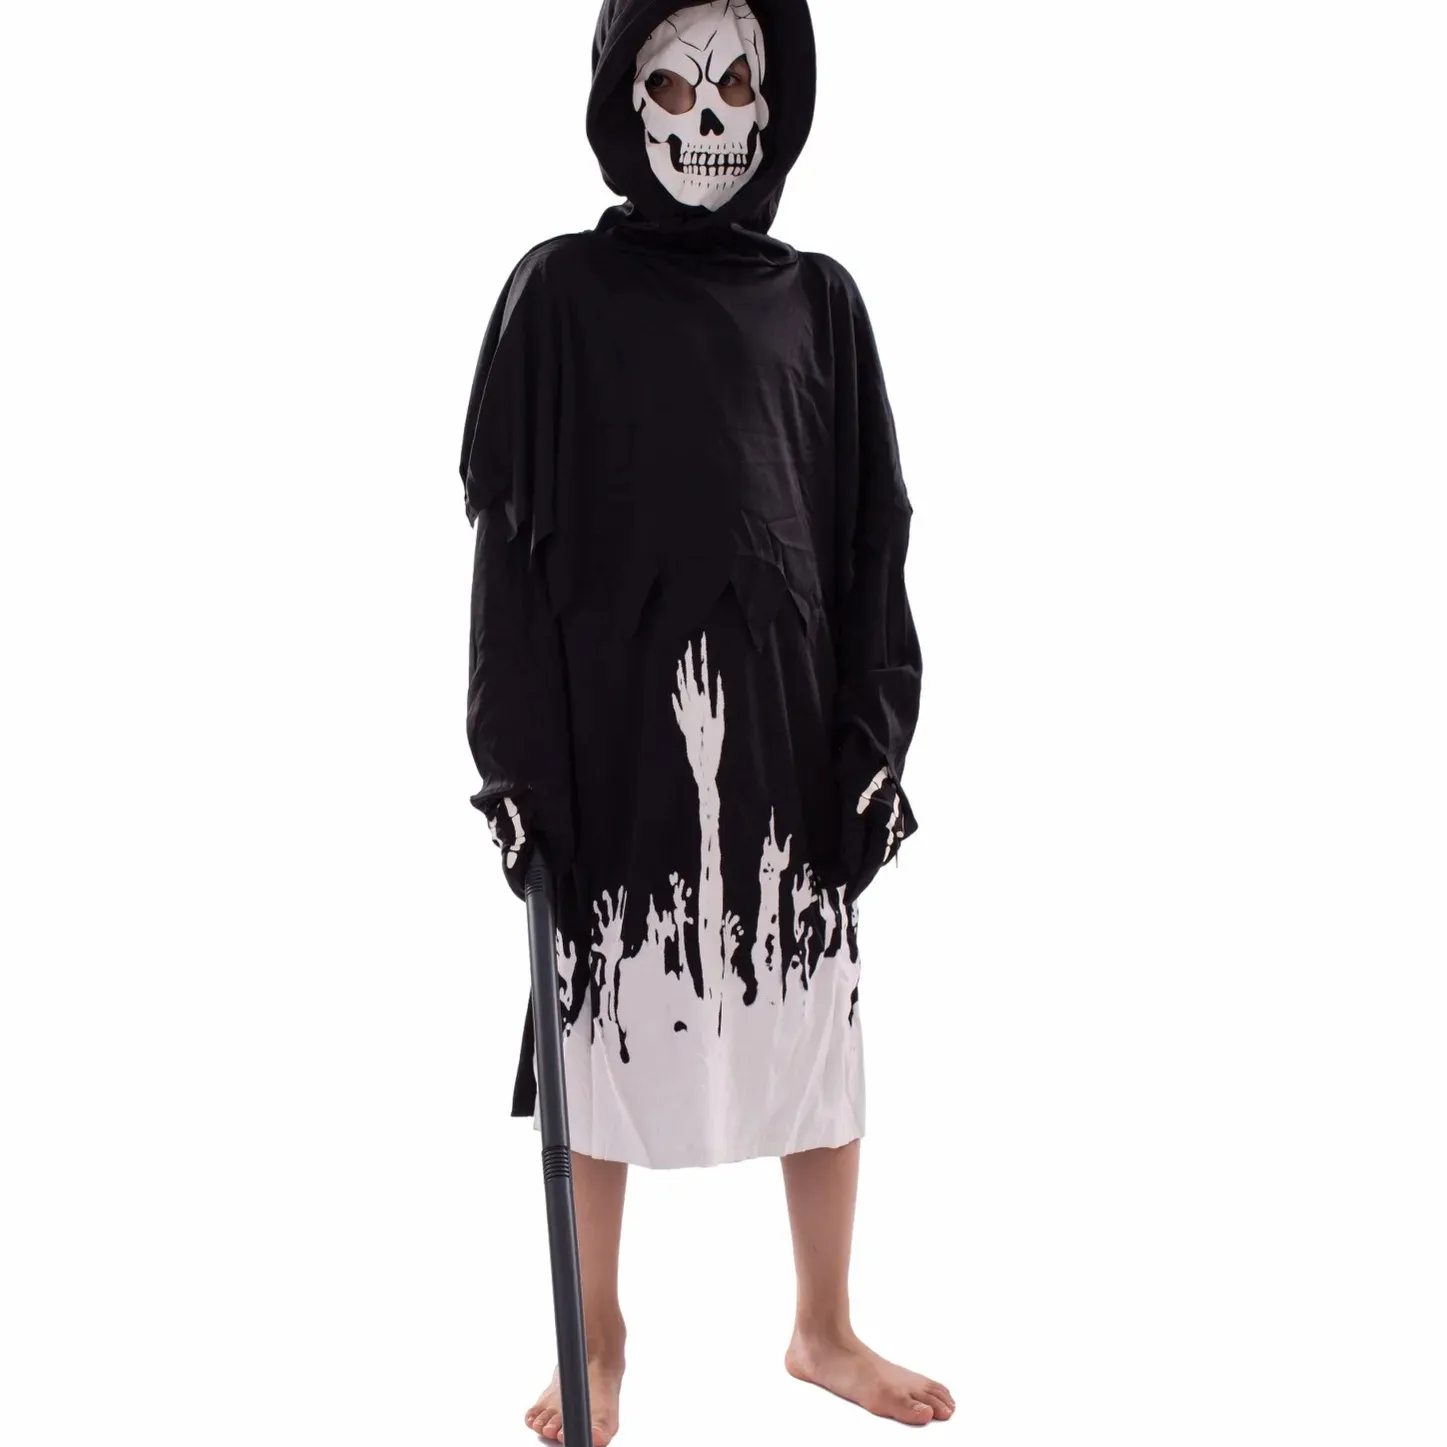 Halloween Children's Skeletons Costume Reaper Dance Party Scary House Dress Up Fluorescent Ghost Suit